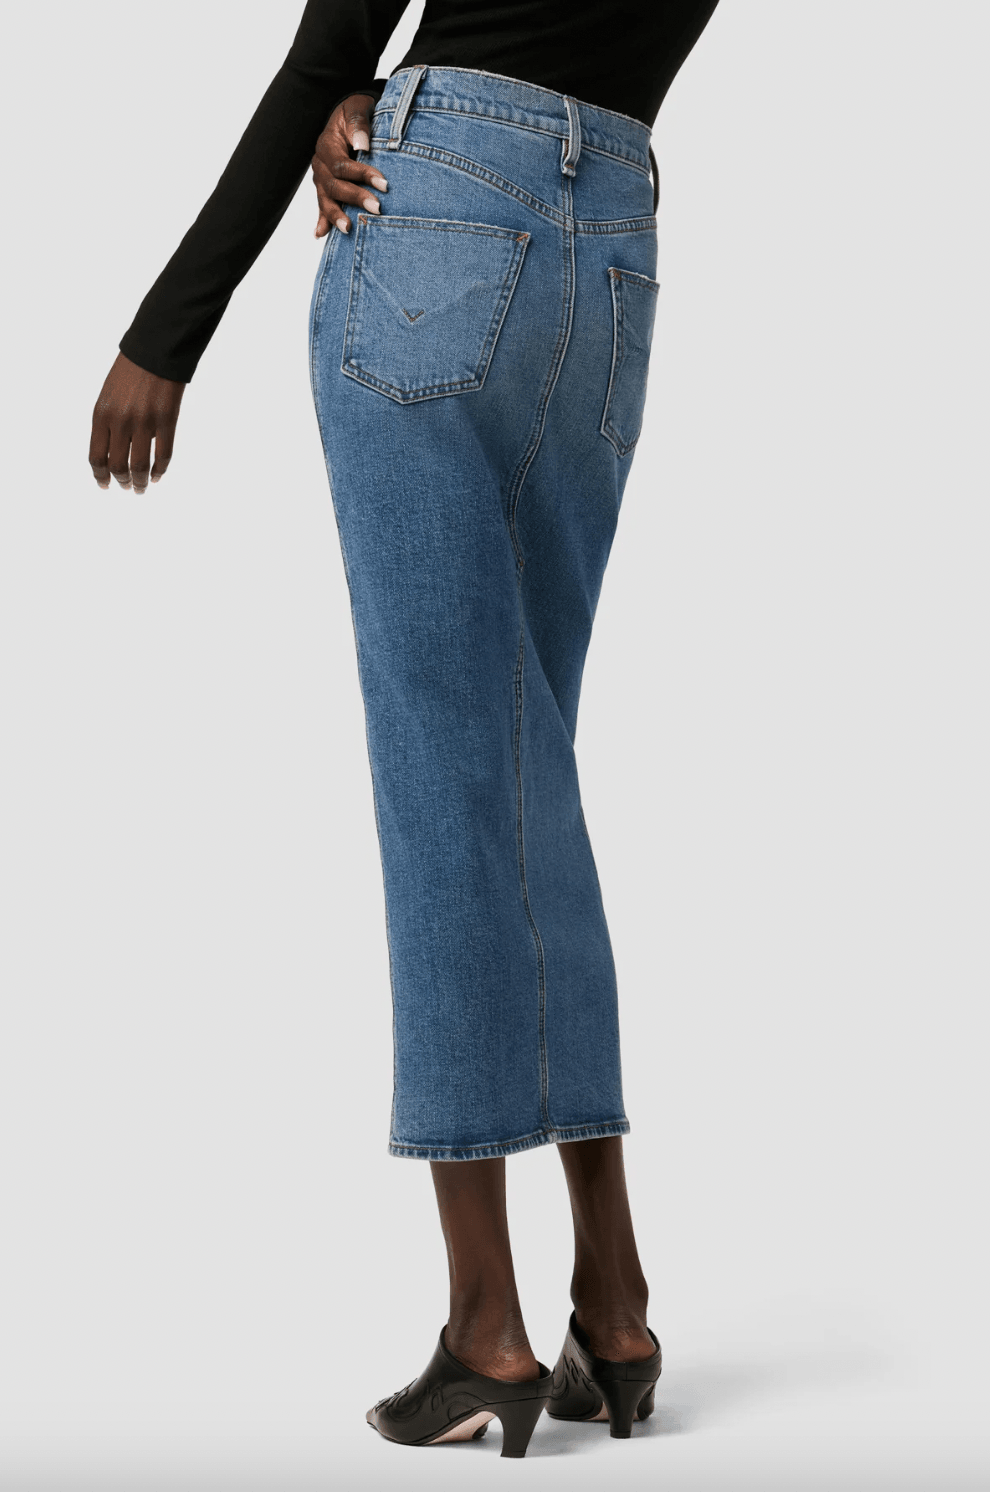 Reconstructed Midi Jean Skirt by Hudson - Haven